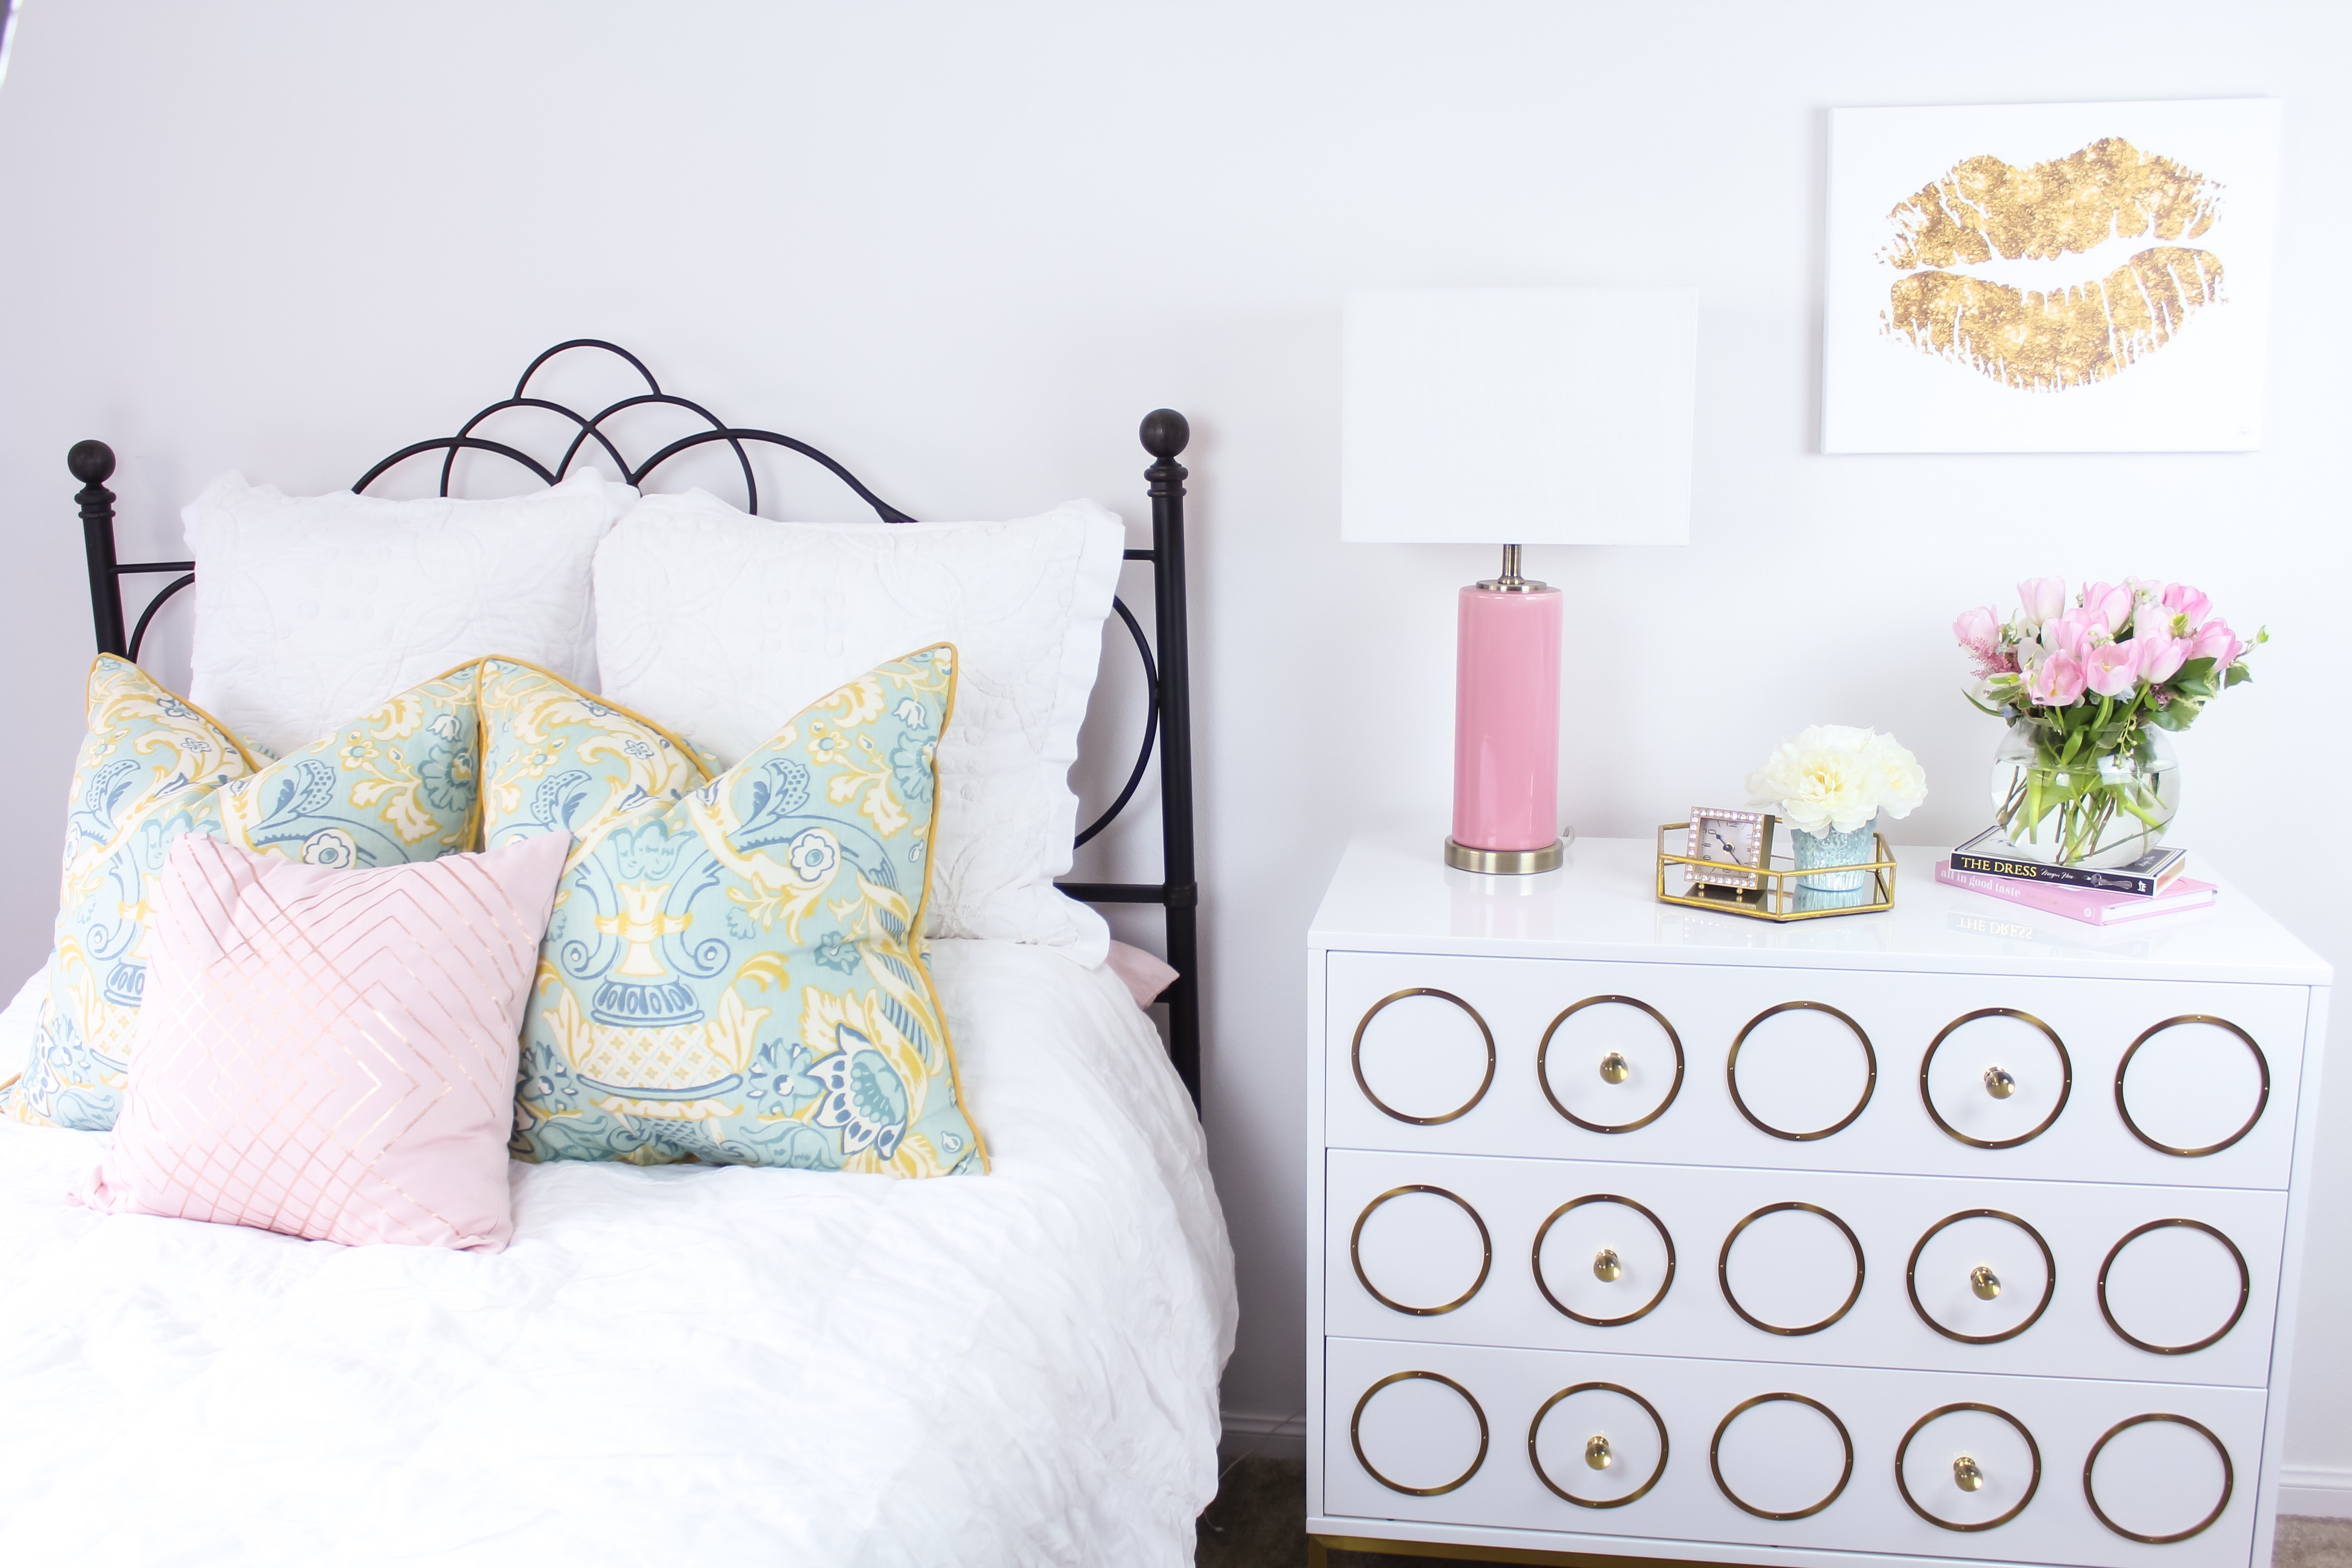 Accents of Gold, Turquoise, Rose and Decorative Knobs | Bedroom Oasis